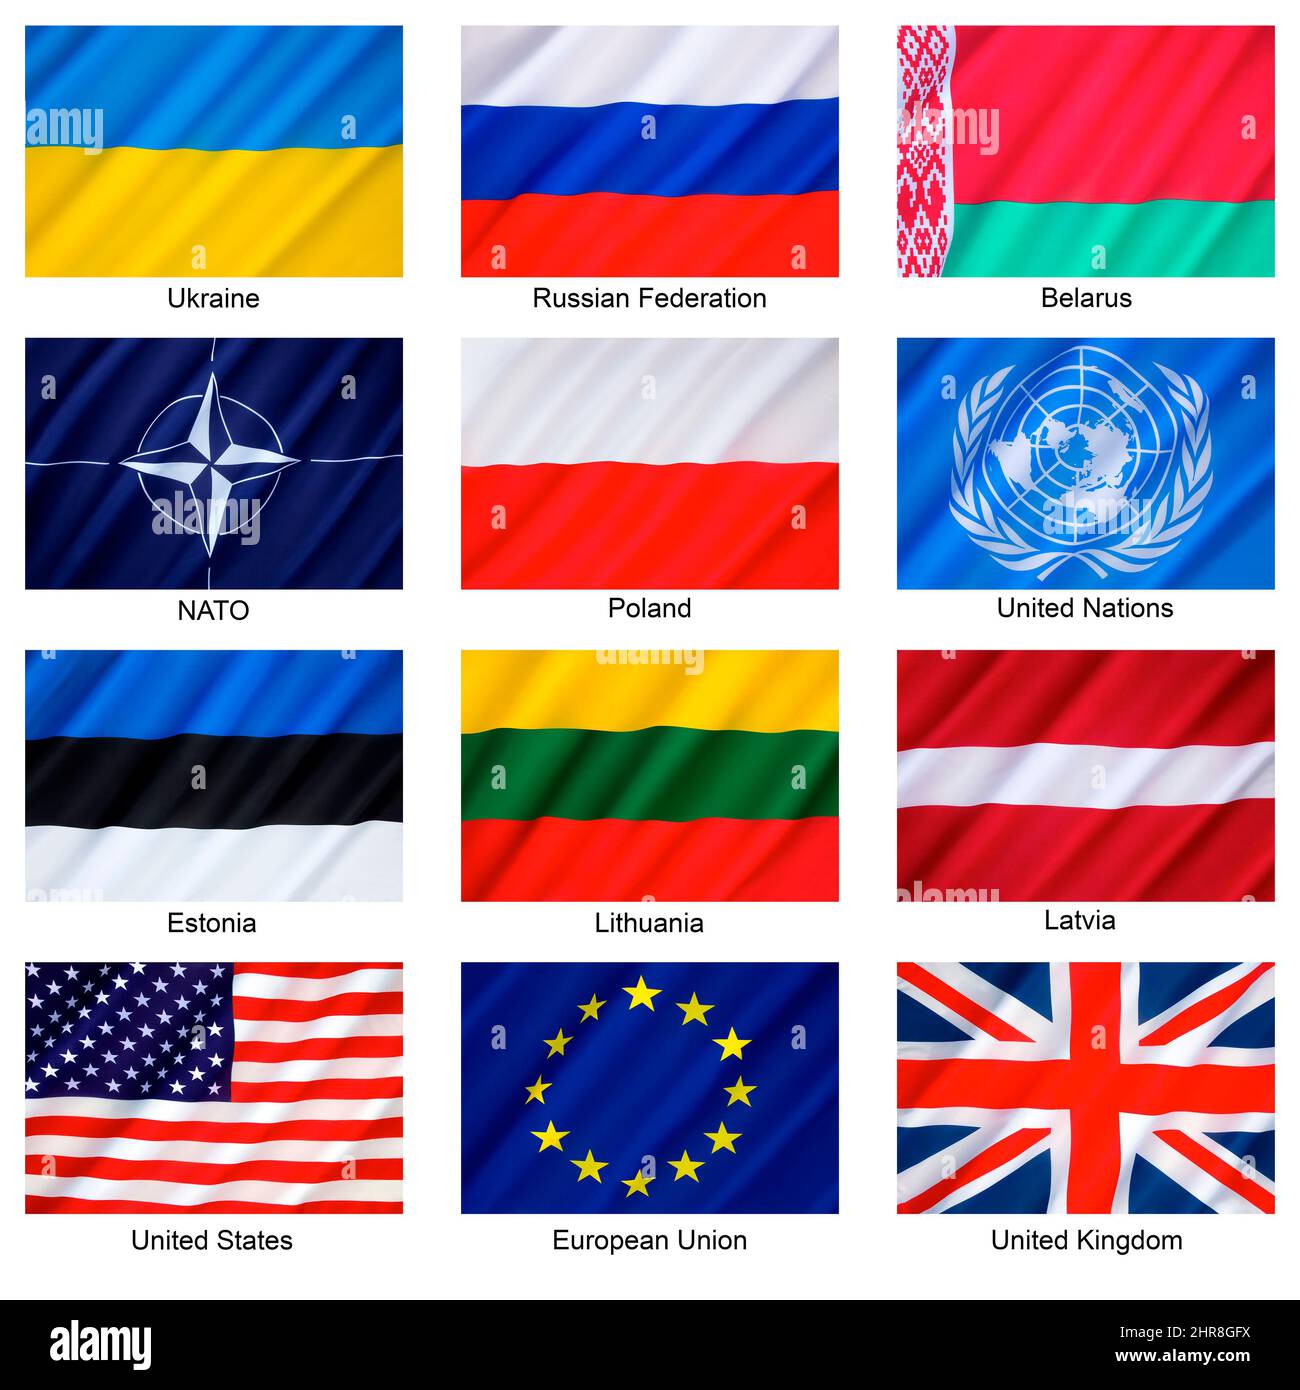 Russian Federation - Ukraine conflict - Flags of the countries involved, the former Soviet States, the UN, NATO  and the main western nations - the co Stock Photo